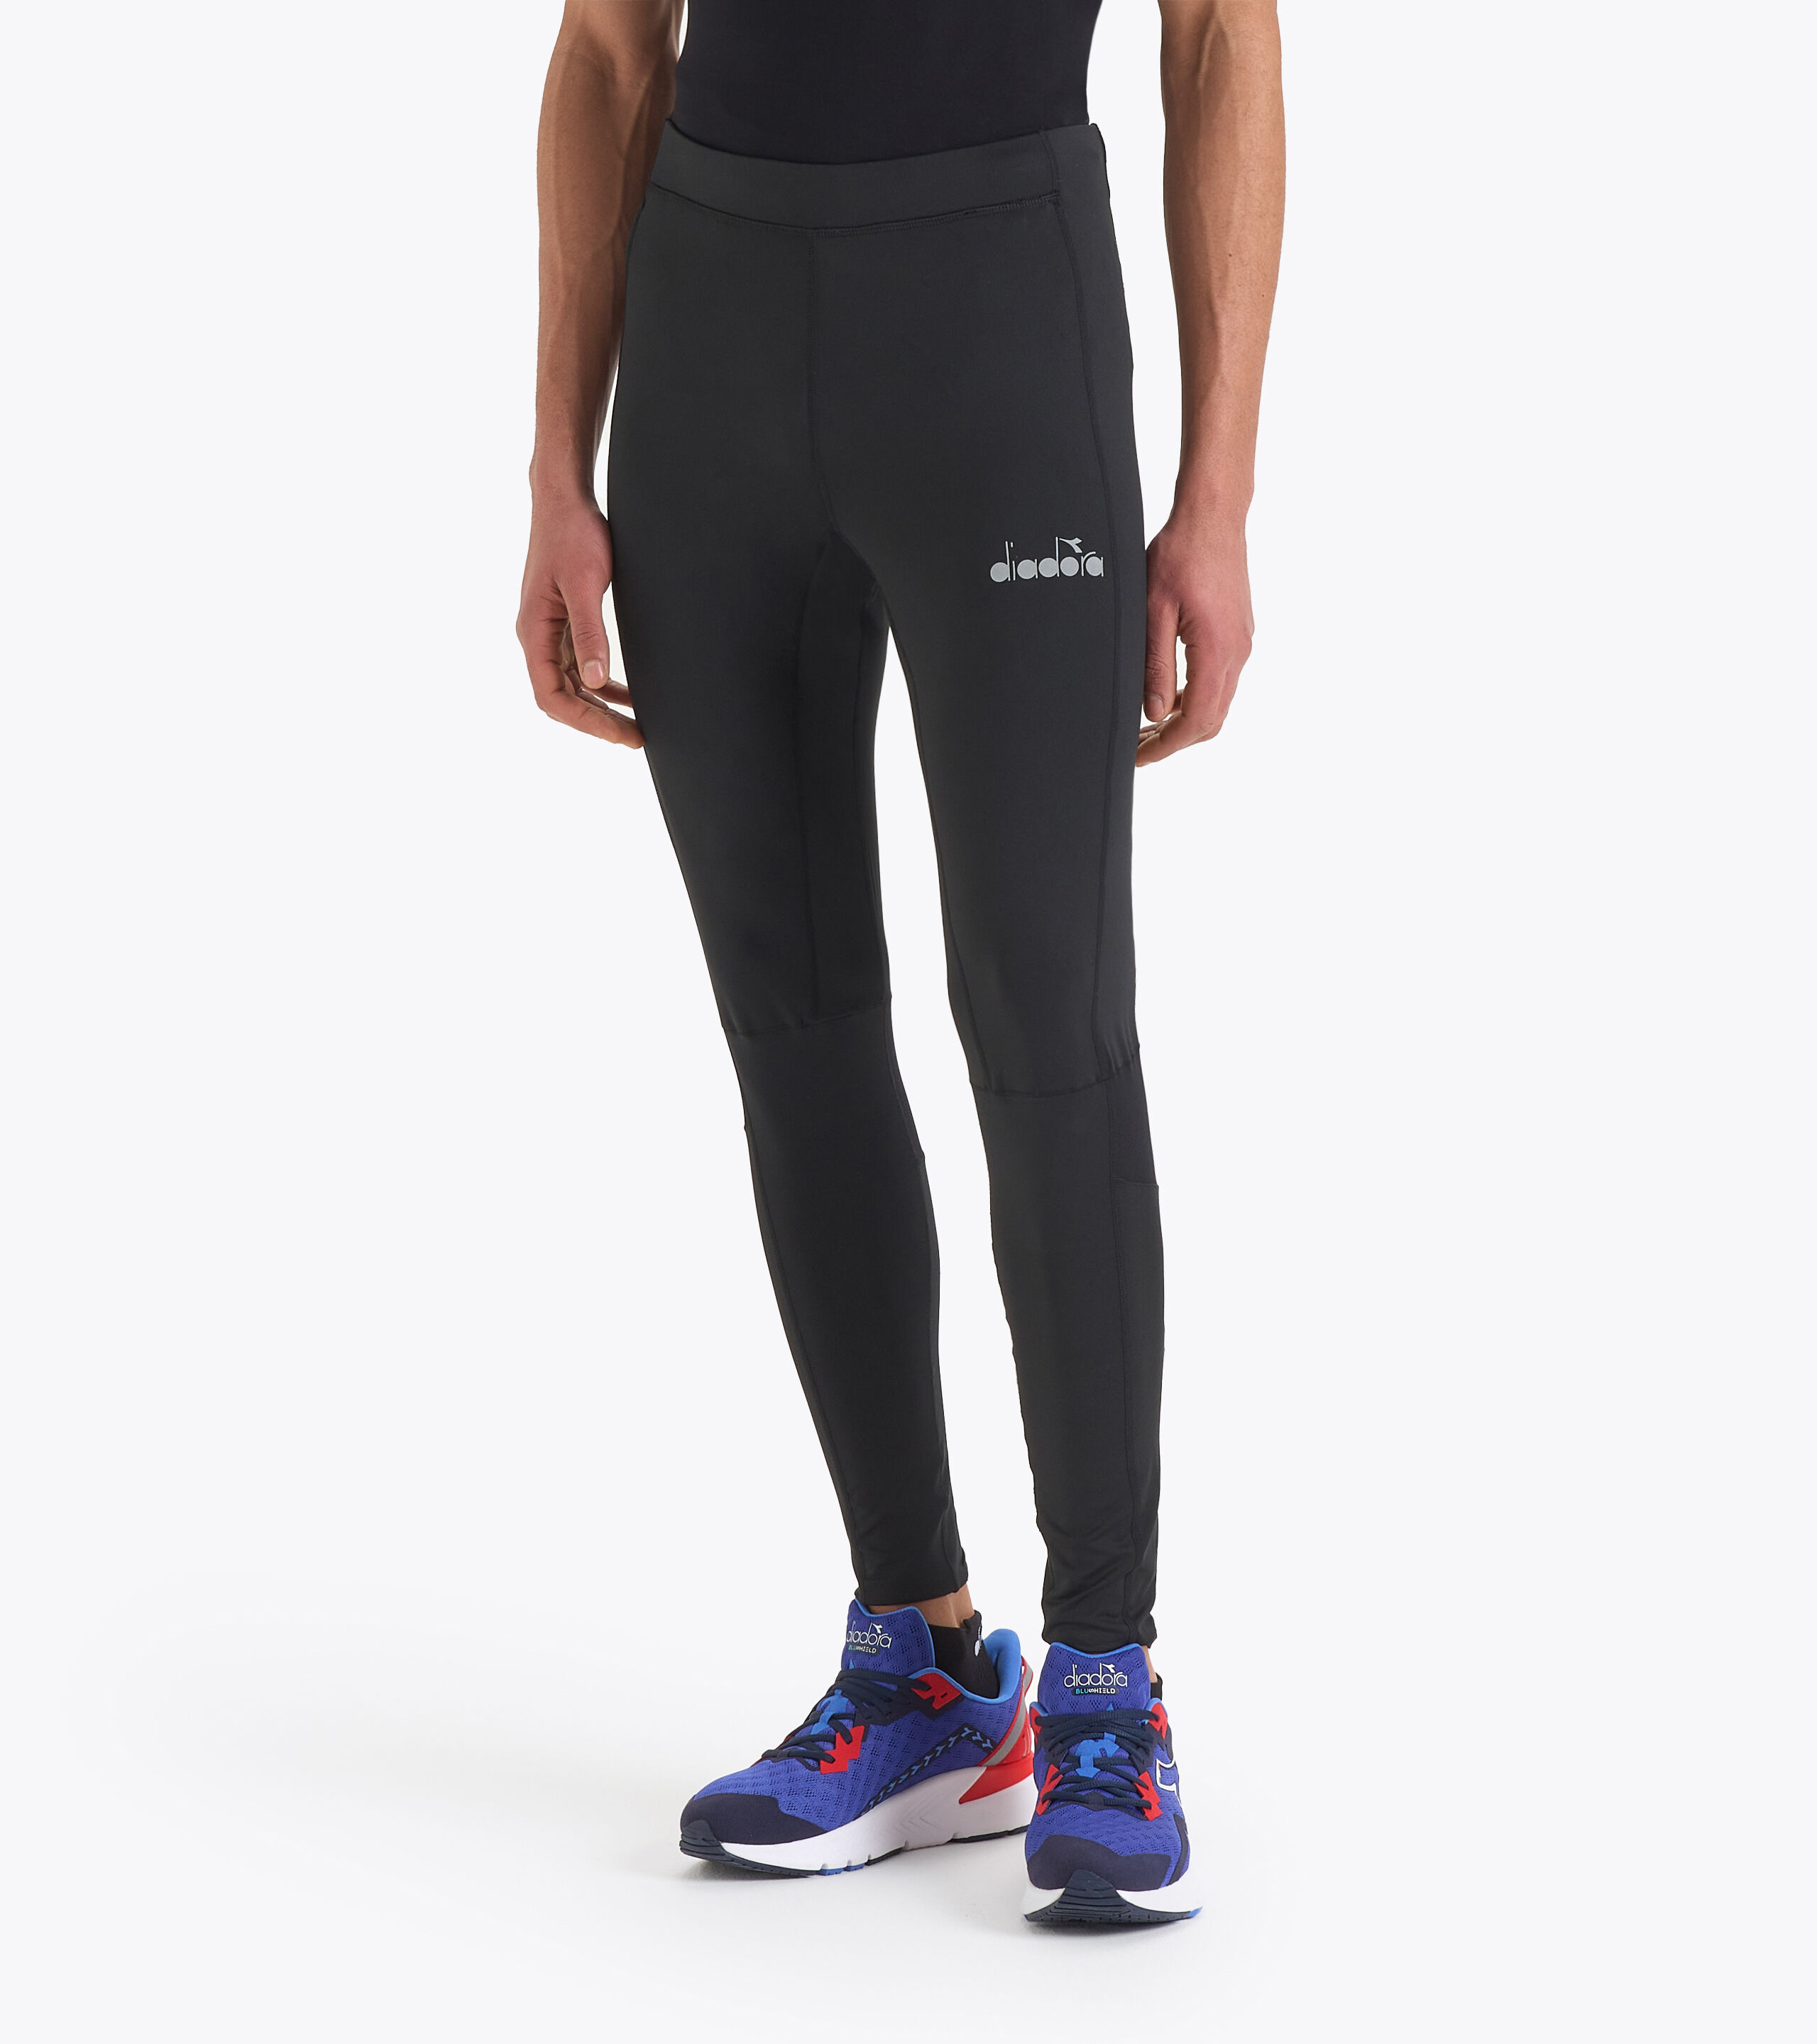 Decathlon Sports India - RCity - Living on a tight budget? You can still  buy those tights under just 999. https://www.decathlon.in/p/8554673/fitness- leggings/100-women-s-fitness-cardio-training-leggings-black?utm_source=IGShopping&utm_medium=Social  ...